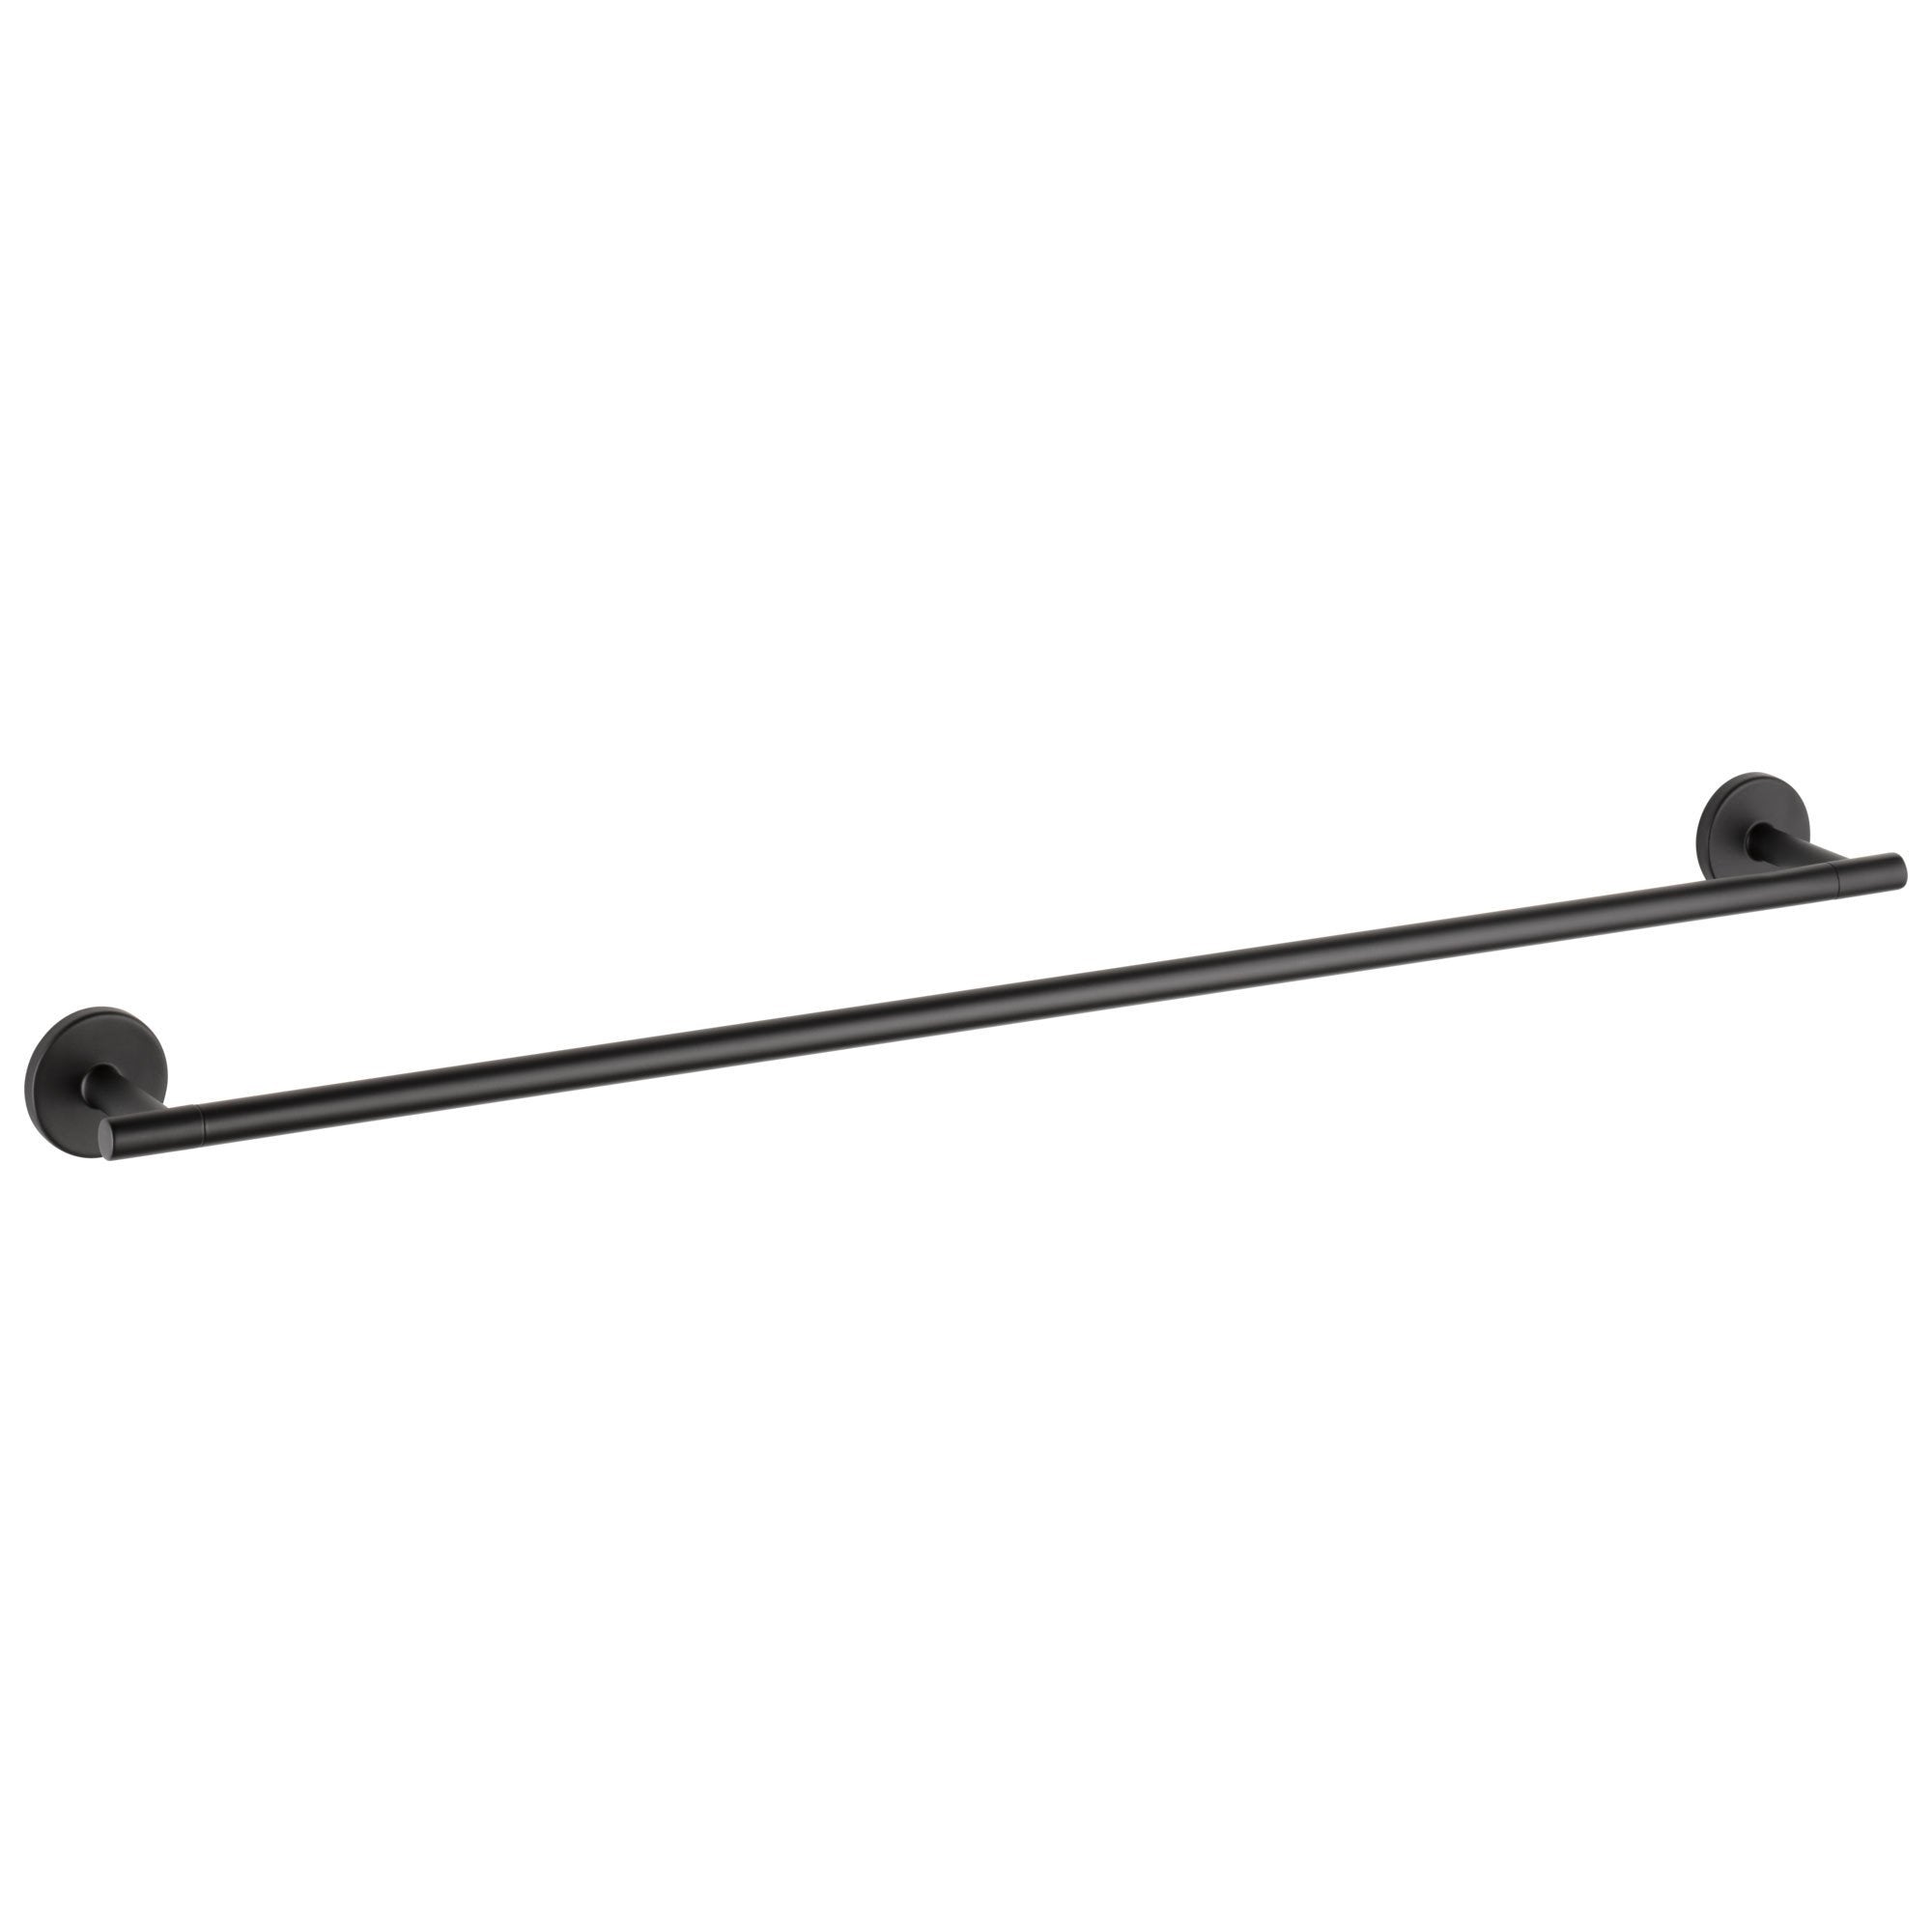 Delta Trinsic Collection Matte Black Finish Wall Mounted 30" Long Single Towel Bar D75930BL